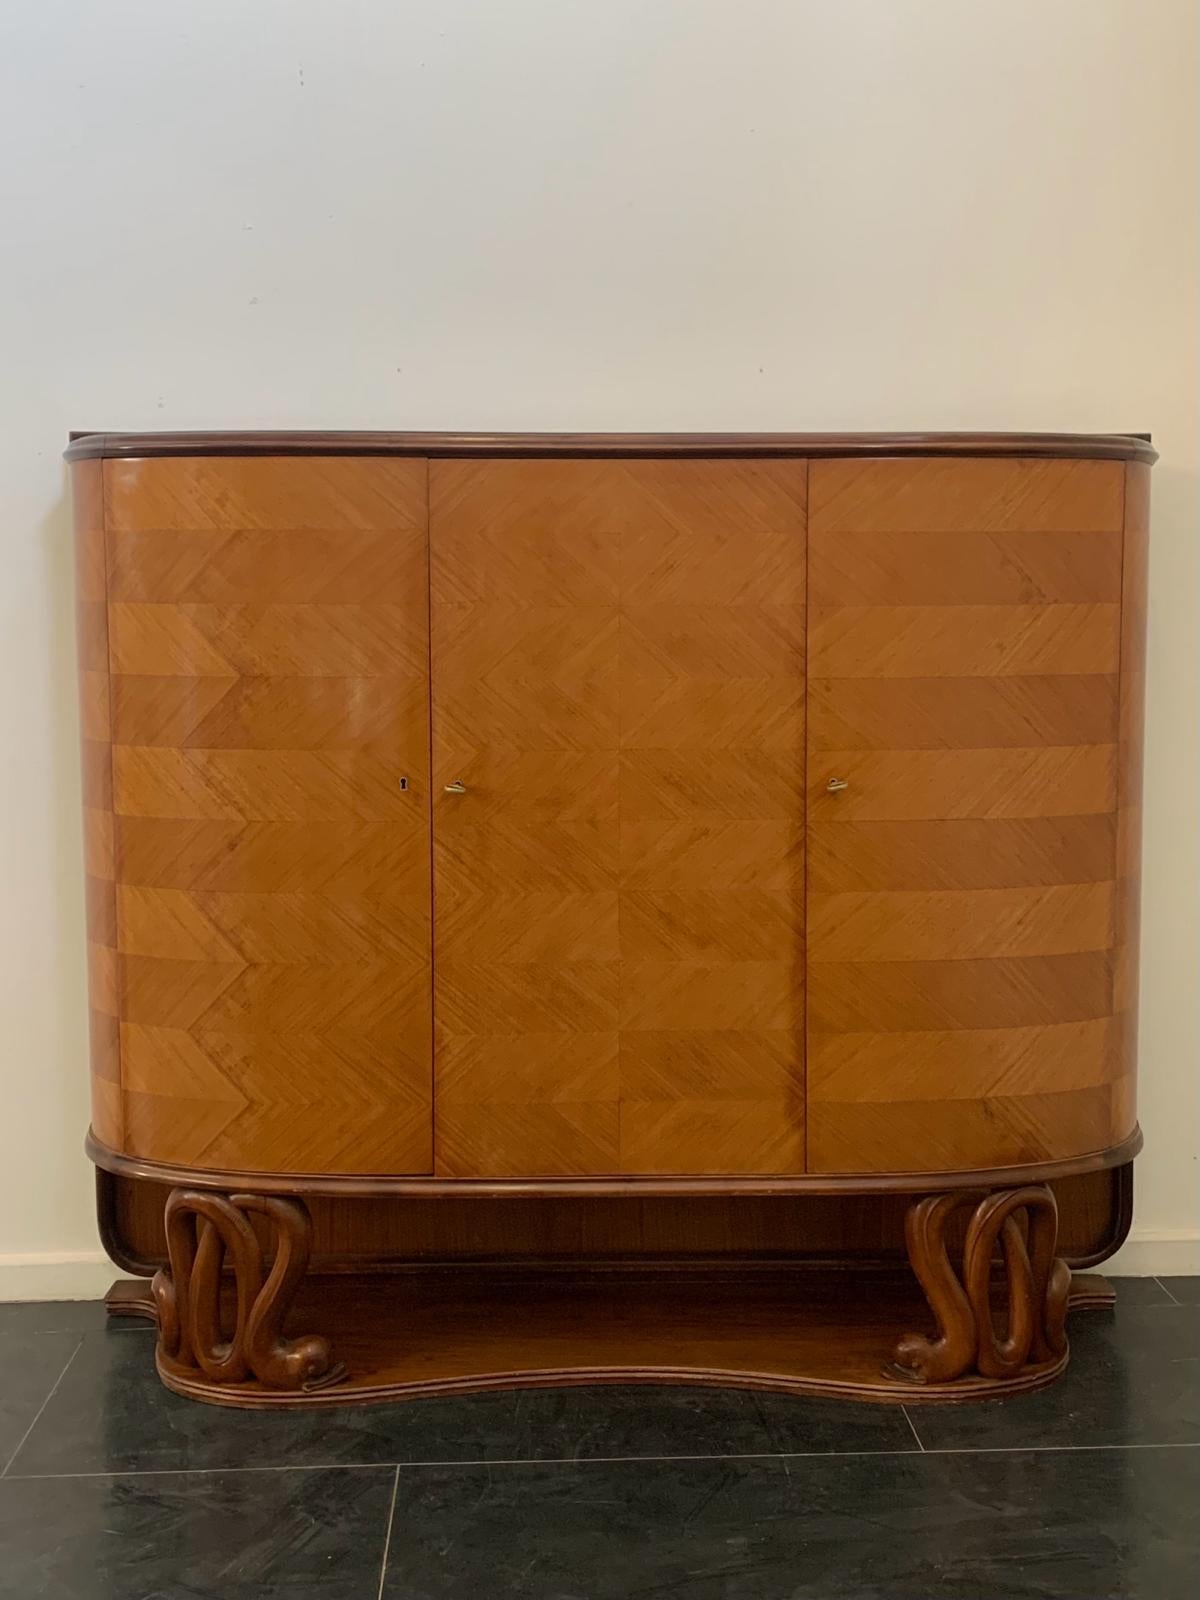 Prestigious and elegant sideboard with mahogany structure and details. Cherrywood veneer with herringbone motif in the central part. Black glass top. The body has rounded sides and it's framed on the back with a grissinato profile. To support the